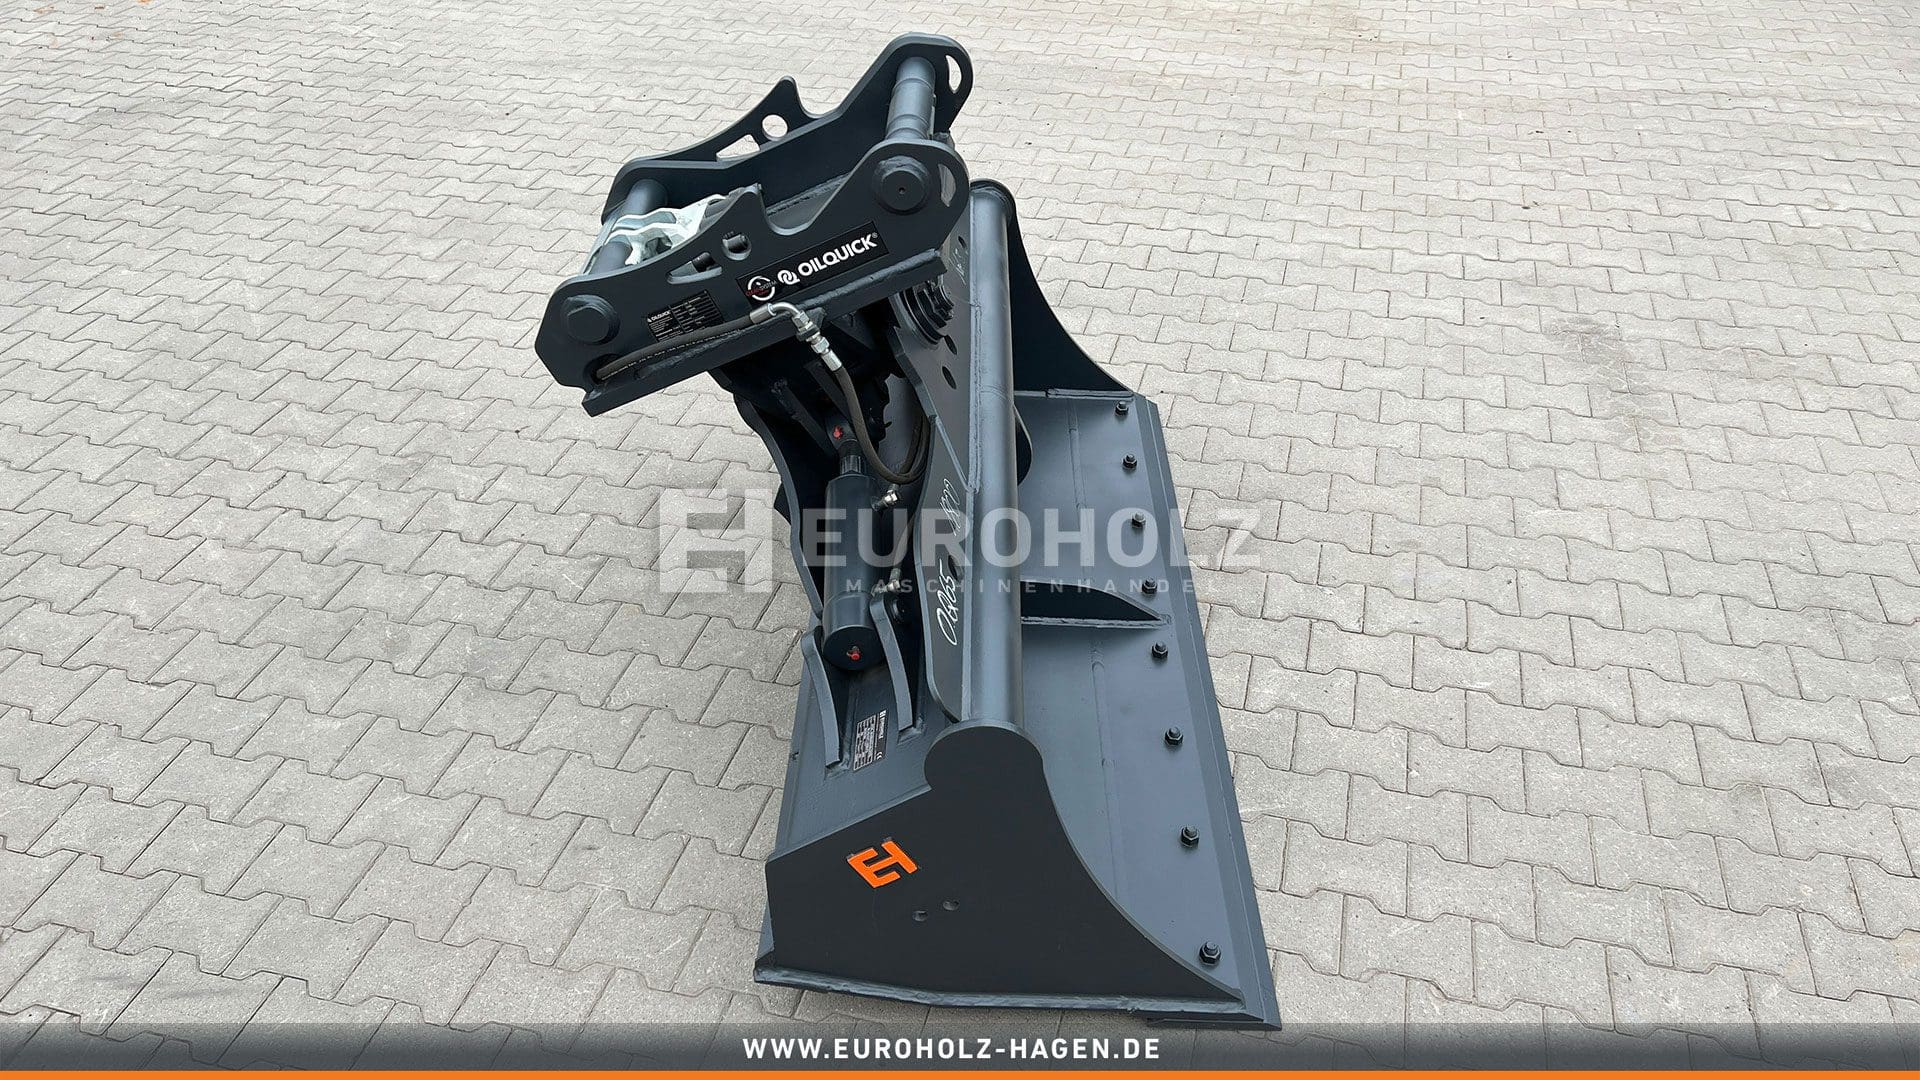 Hydraulic ditch cleaning bucket suitable for OilQuick OQ65 / 1800 mm / cat. 3G / with bolt-on cutting edge